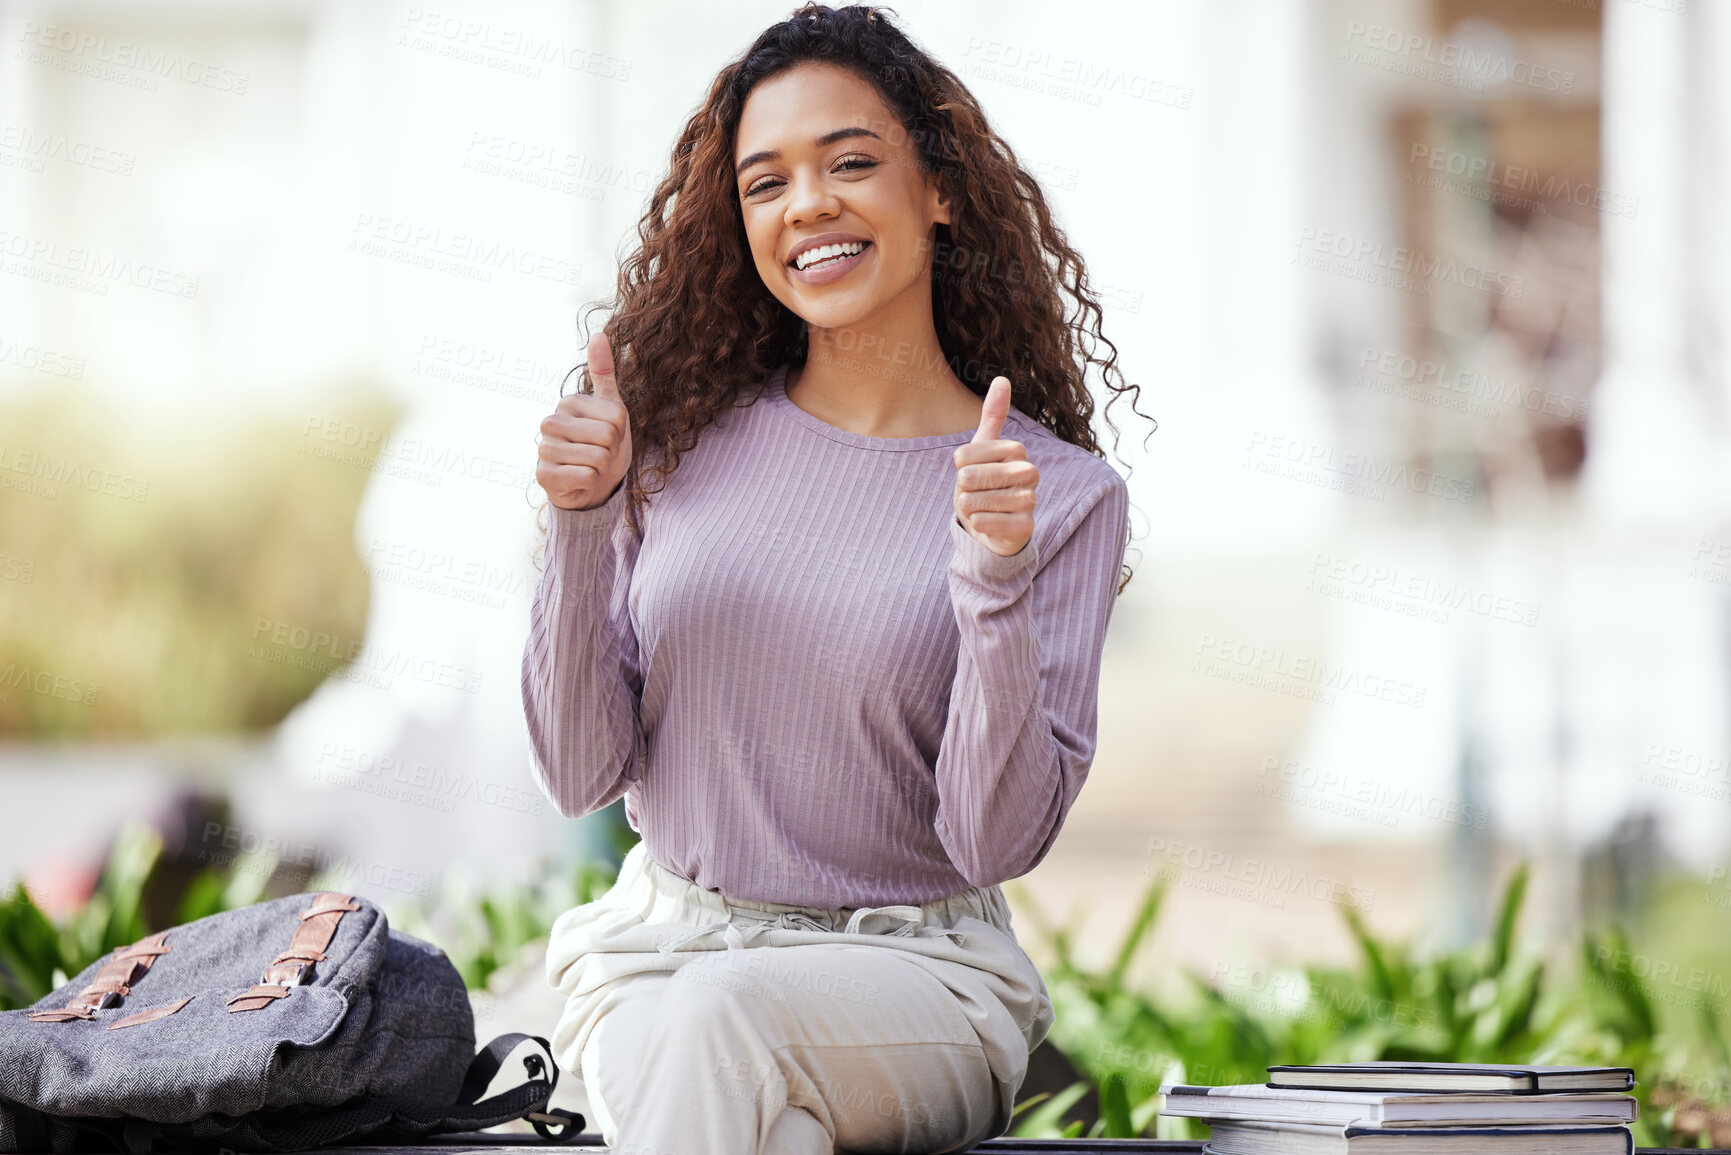 Buy stock photo Shot of a young woman showing a thumbs up while sitting in a park